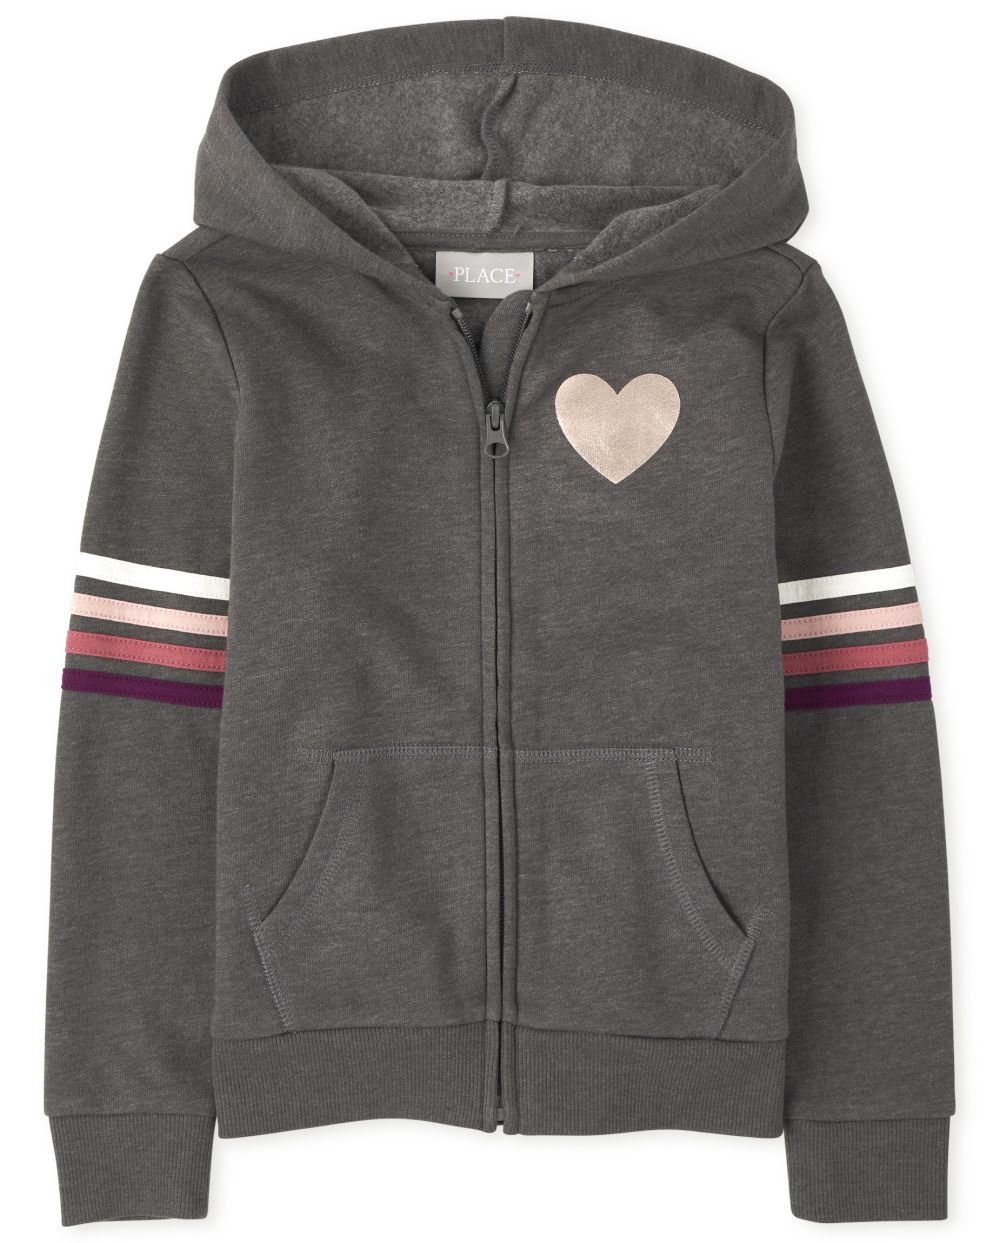 Girls Active Long Striped Sleeve Graphic French Terry Zip Up Hoodie